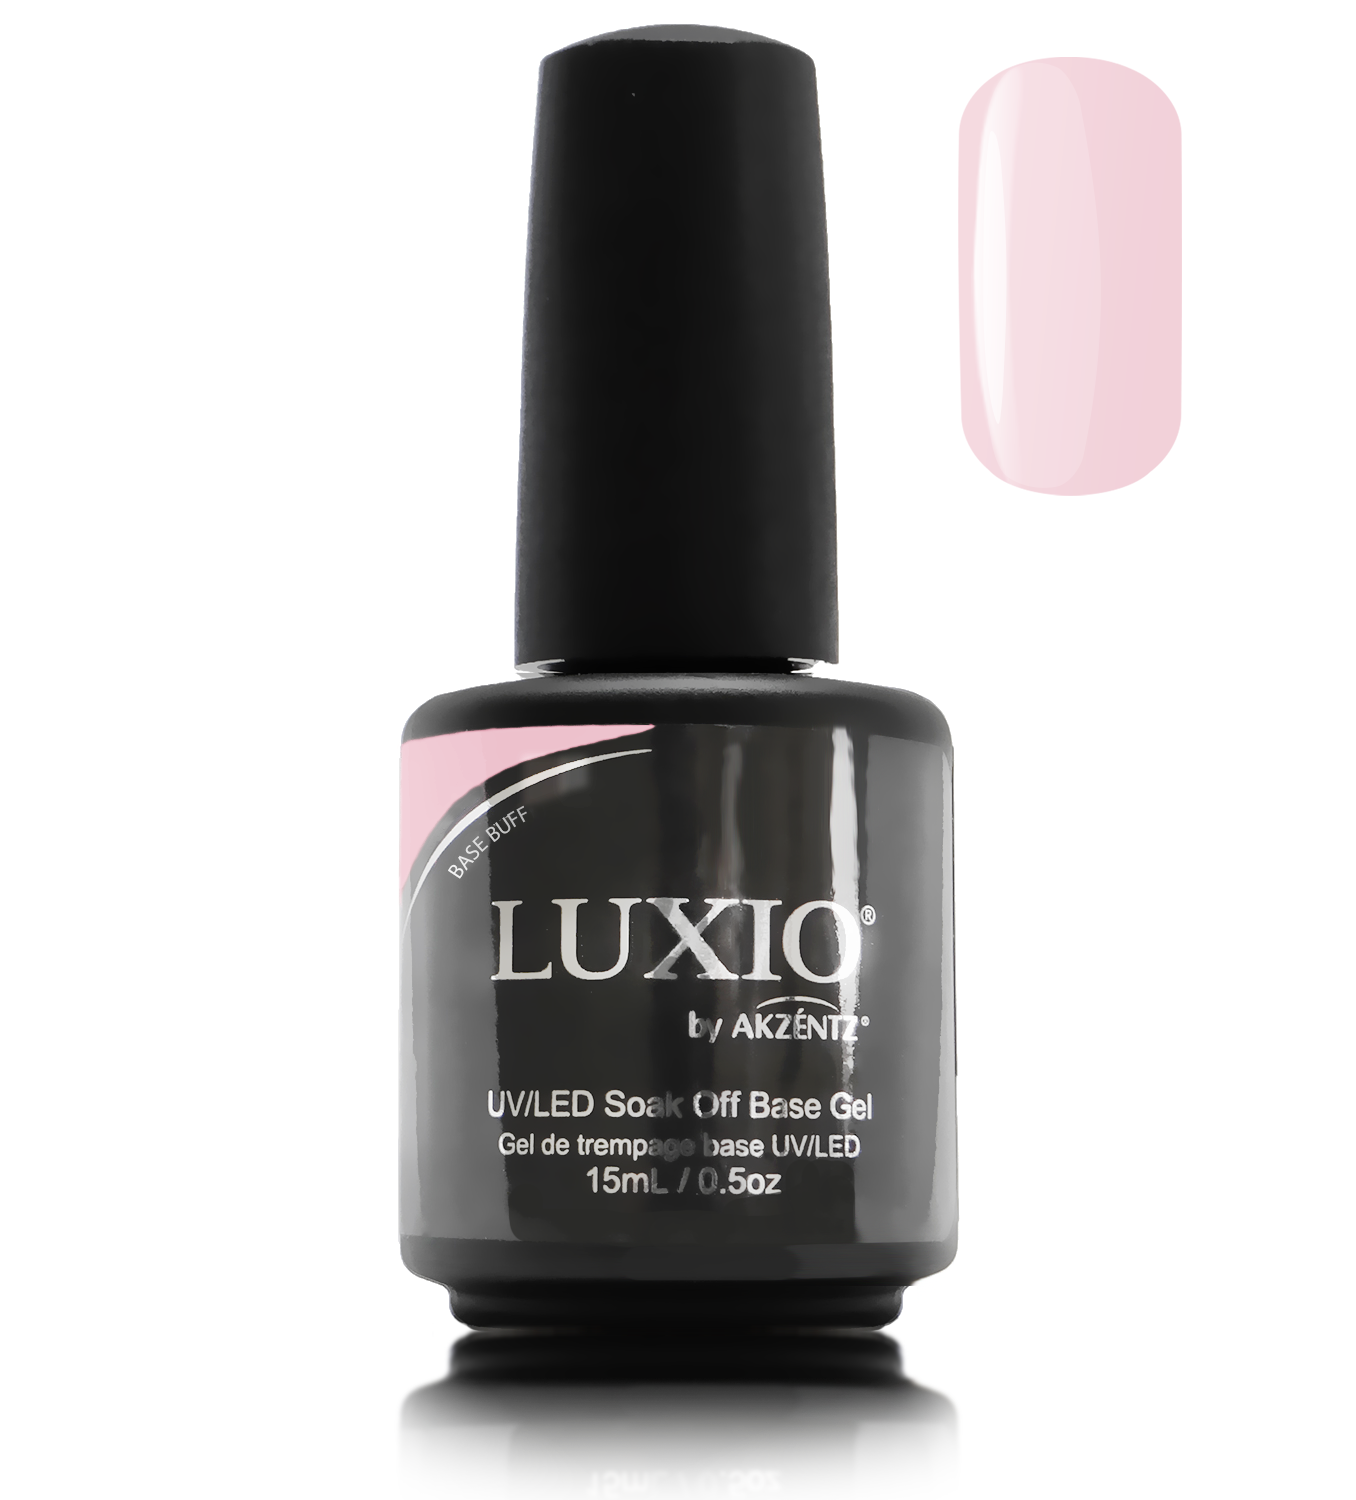 LUXIO -All 3 FULL SIZE (15g) - NAKED BASE COLL: BUFF, SMIRK, STARK